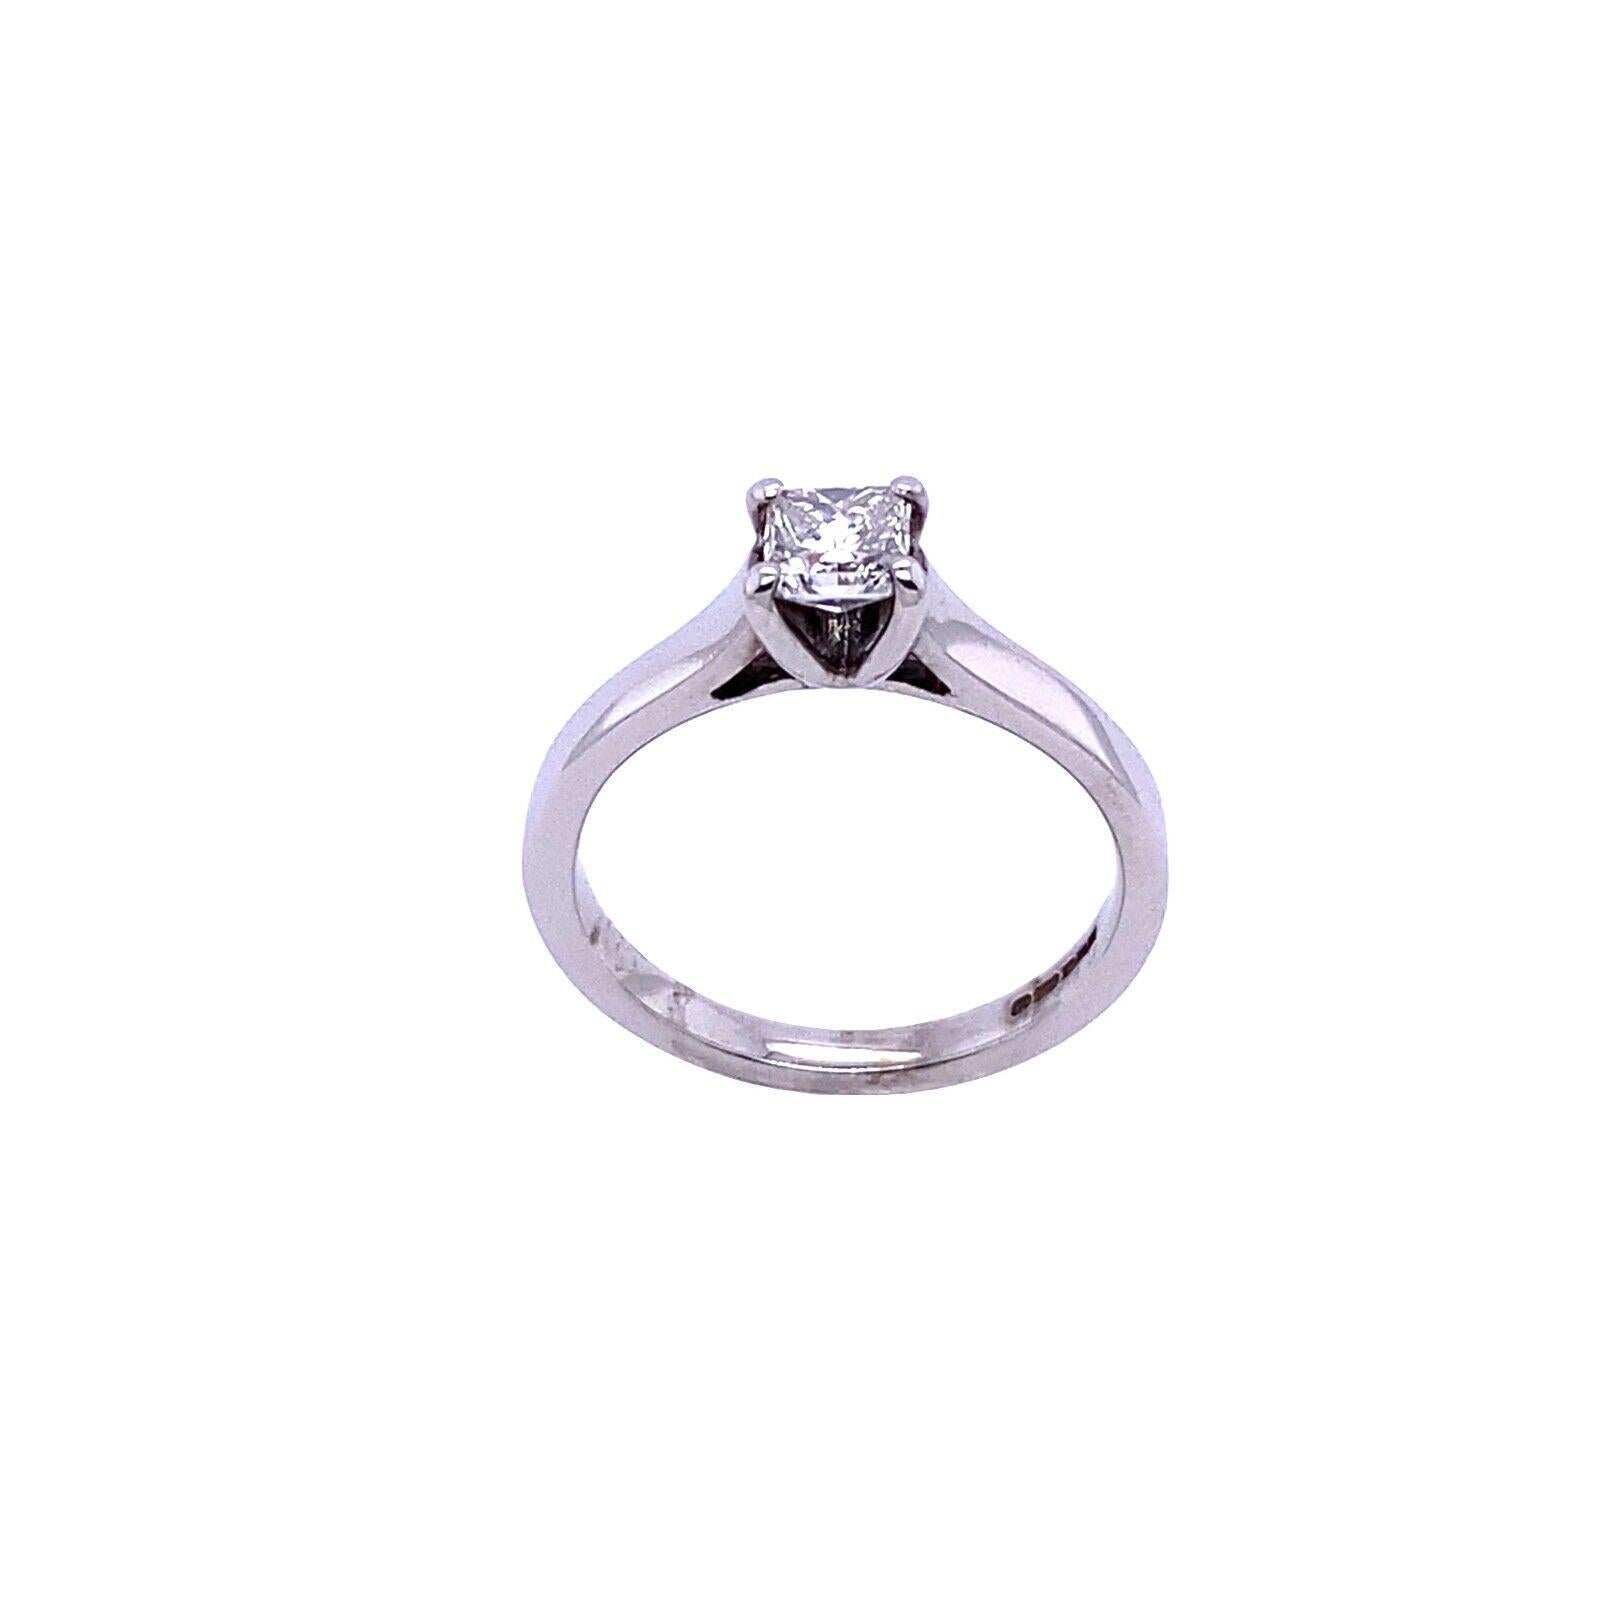 0.35ct G SI1 Princess Cut Diamond Ring in 18ct White Gold In Excellent Condition For Sale In London, GB